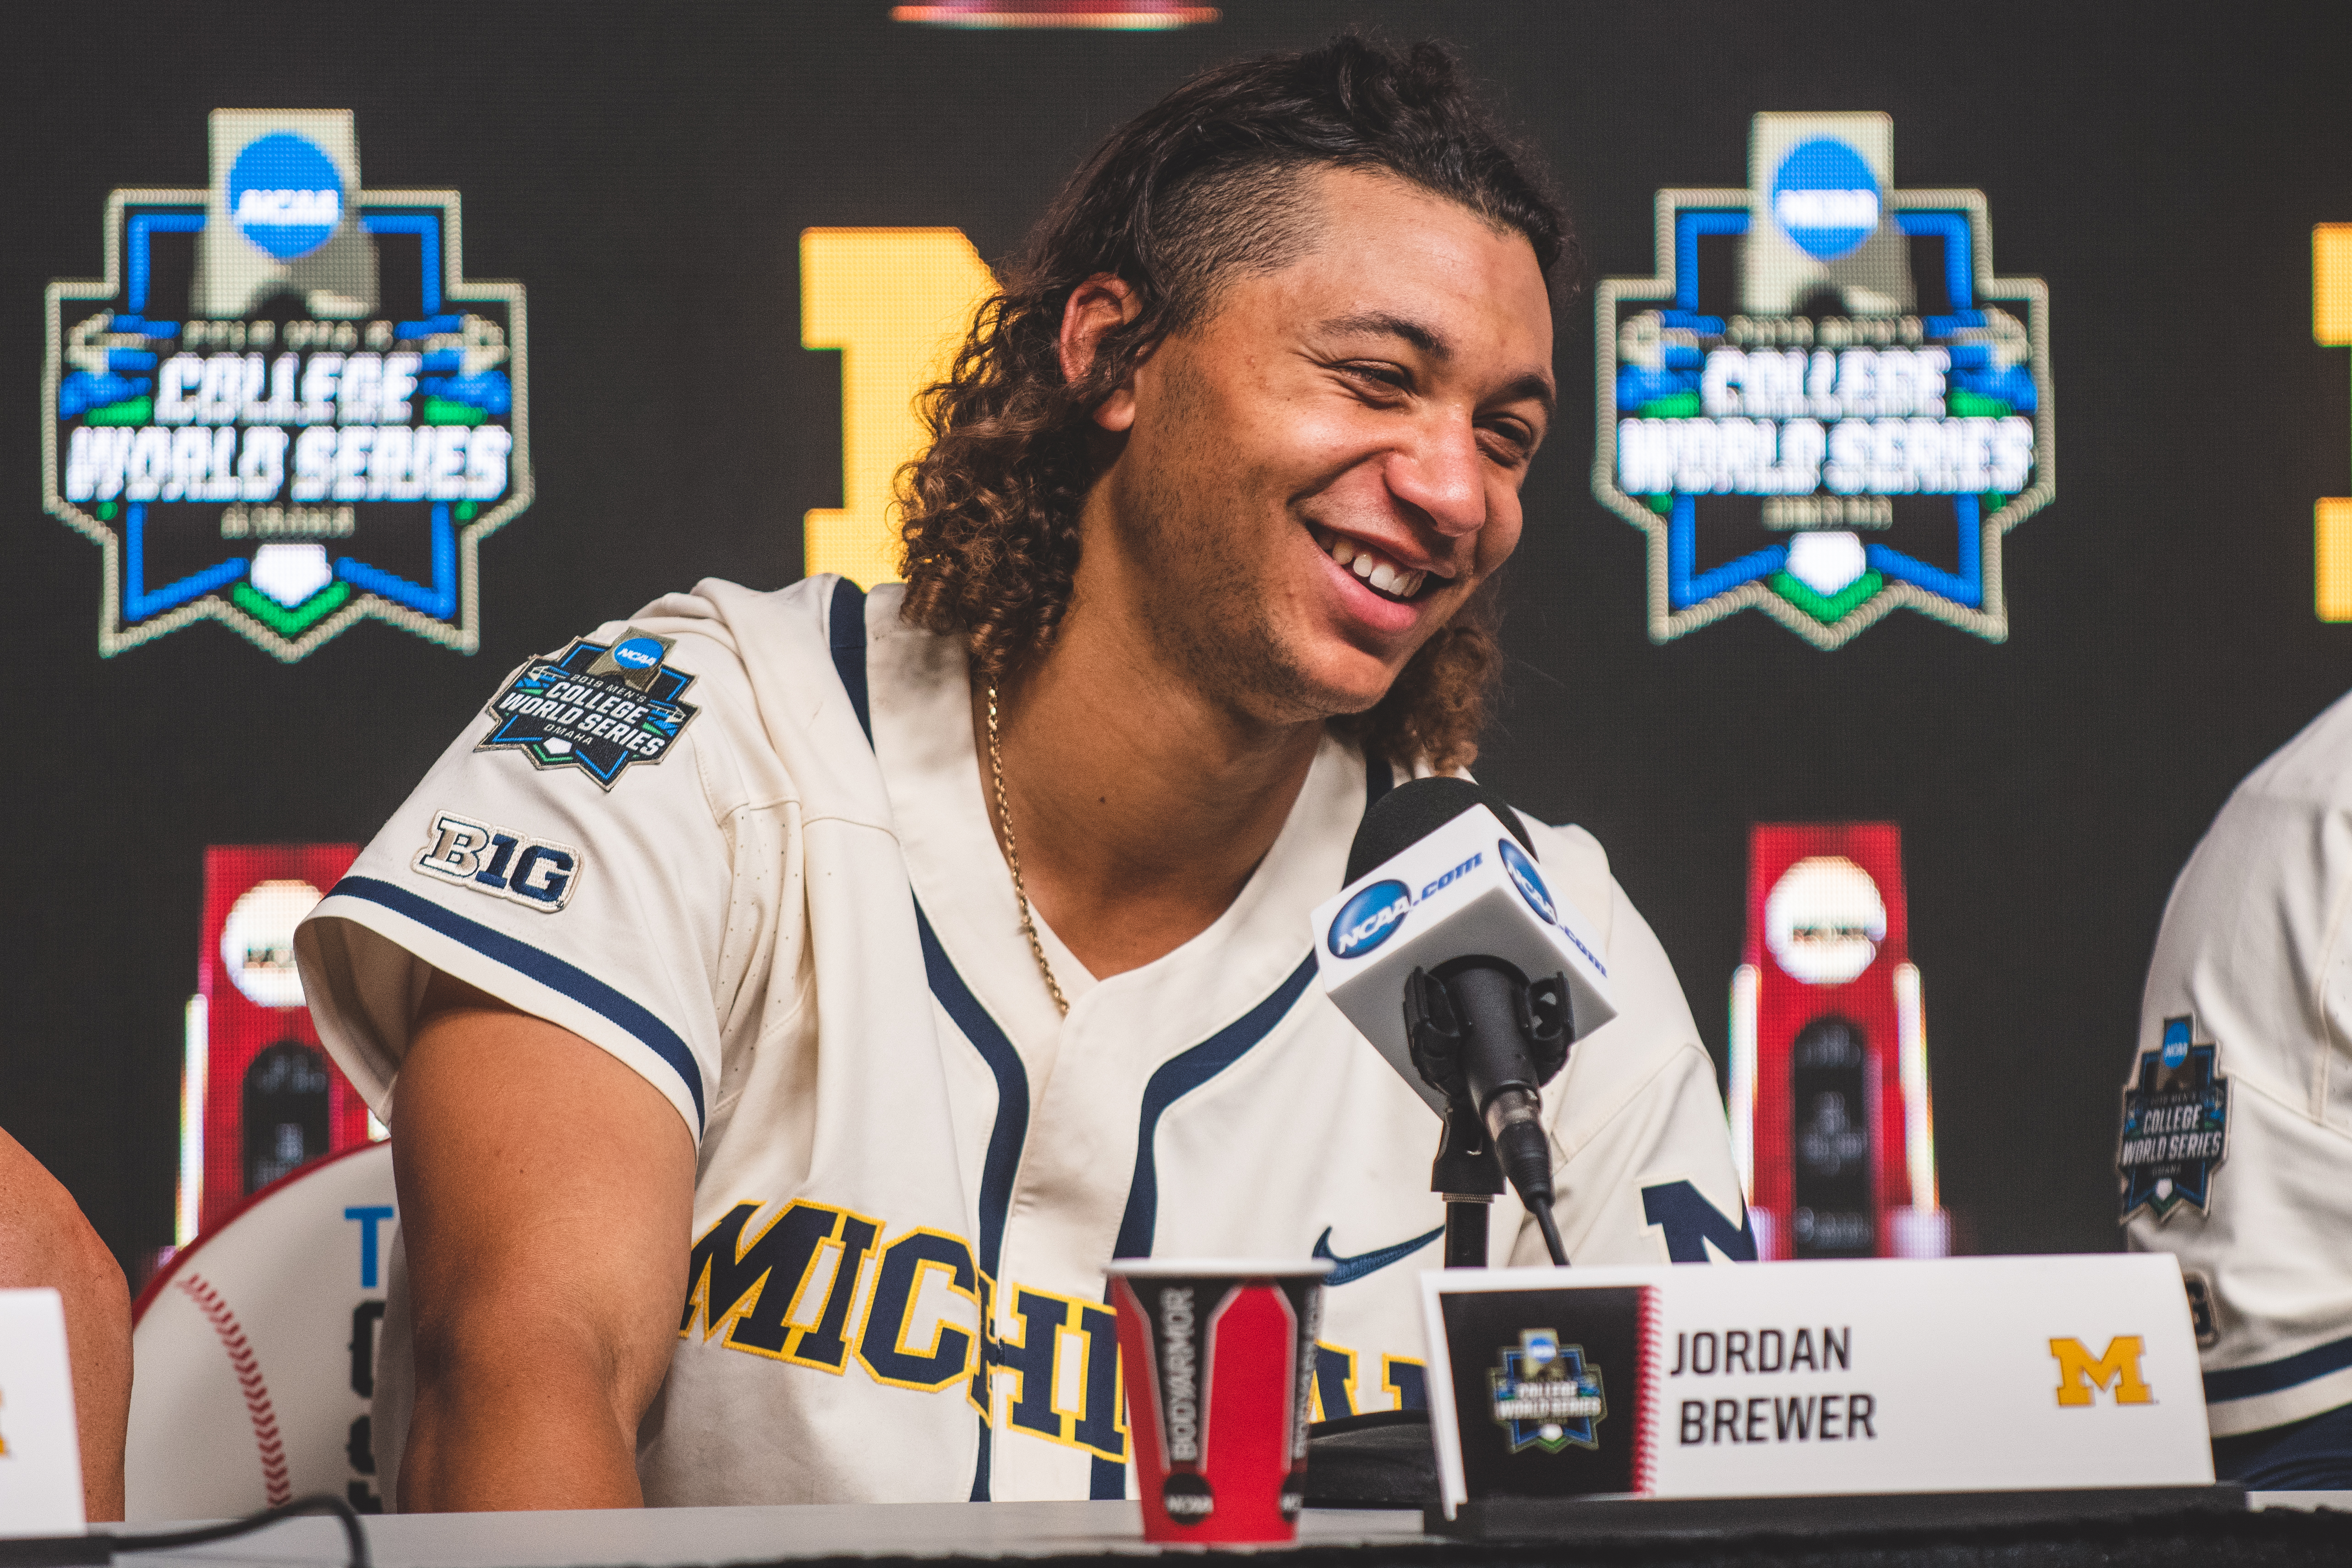 Jordan Brewer (Potawatomi) finished with two hits, two runs and one RBI in Michigan’s Game 1 win at CWS